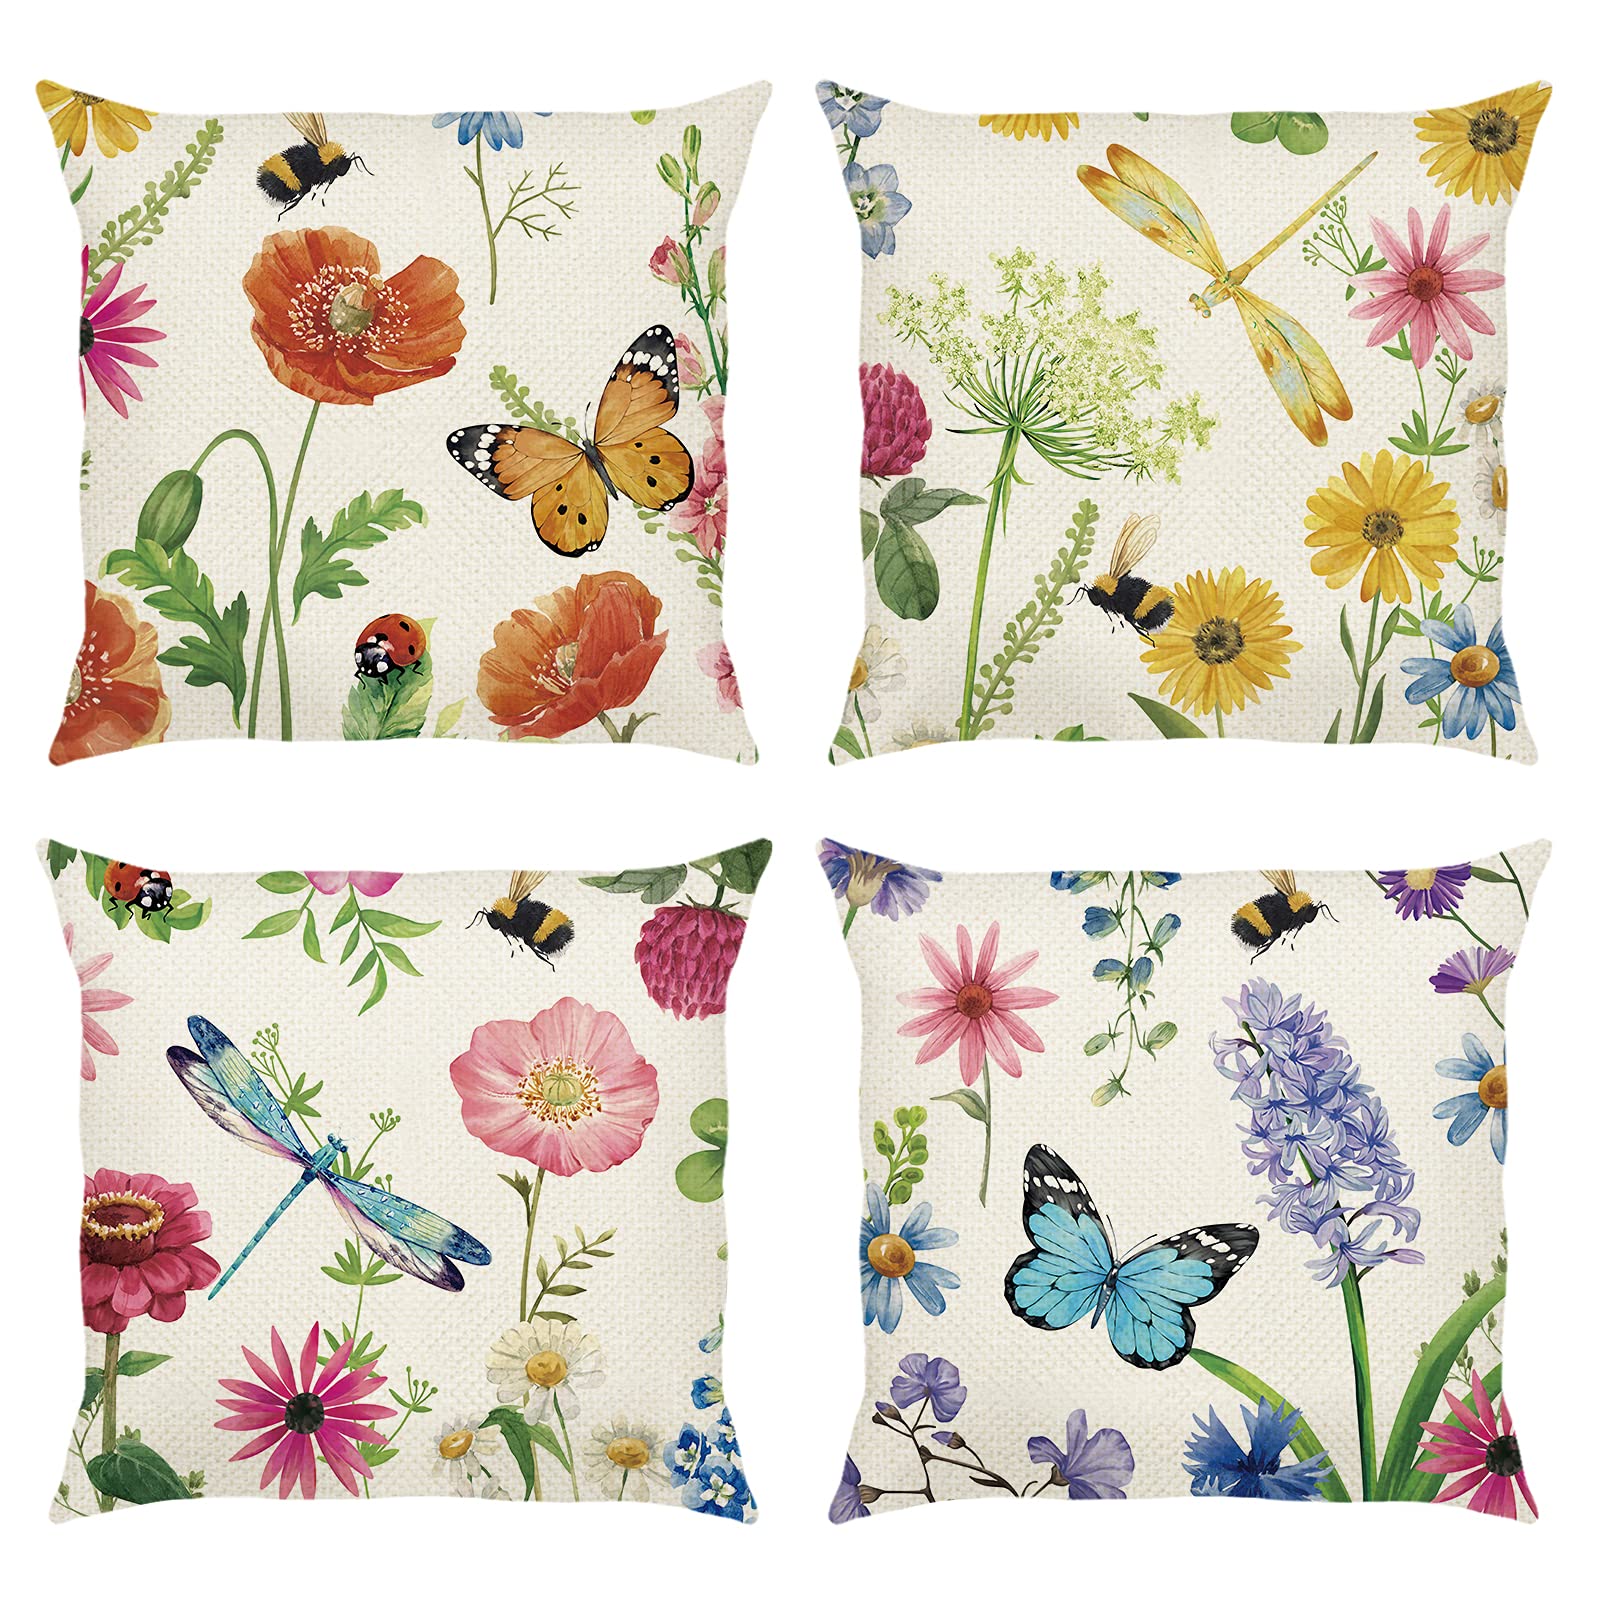 Bonhause Flowers Cushion Covers 18 x 18 Inch Set of 4 Garden Floral and Butterfly Decorative Summer Spring Throw Pillow Covers Polyester Linen Pillowcase for Sofa Garden Outdoor Home Decor, 45 x 45 cm